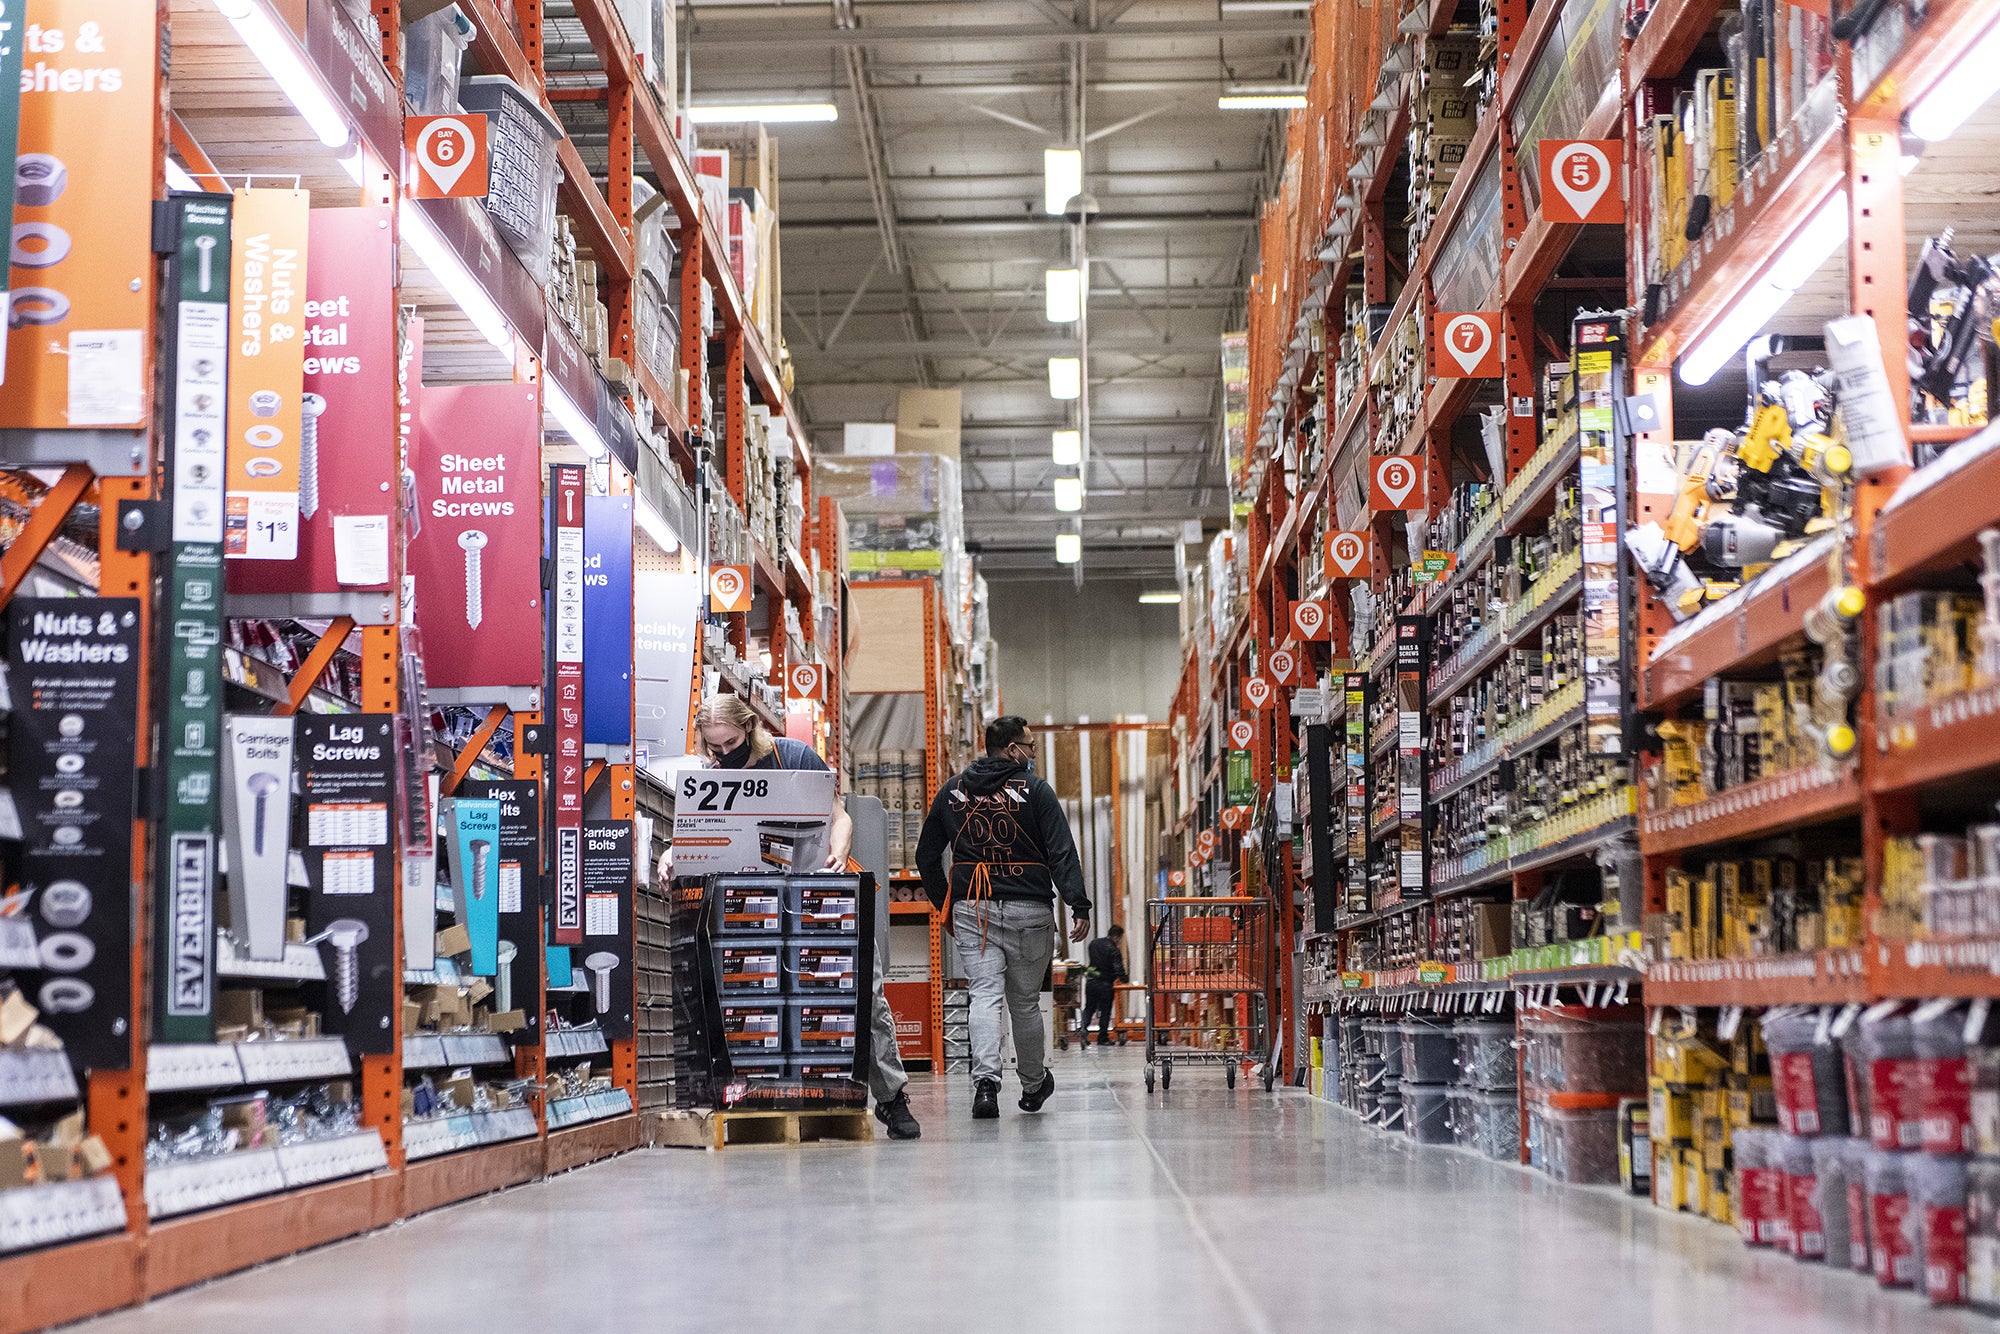 Home Depot to spend $1 billion more on hourly workers - Indianapolis News, Indiana Weather, Indiana Traffic, WISH-TV